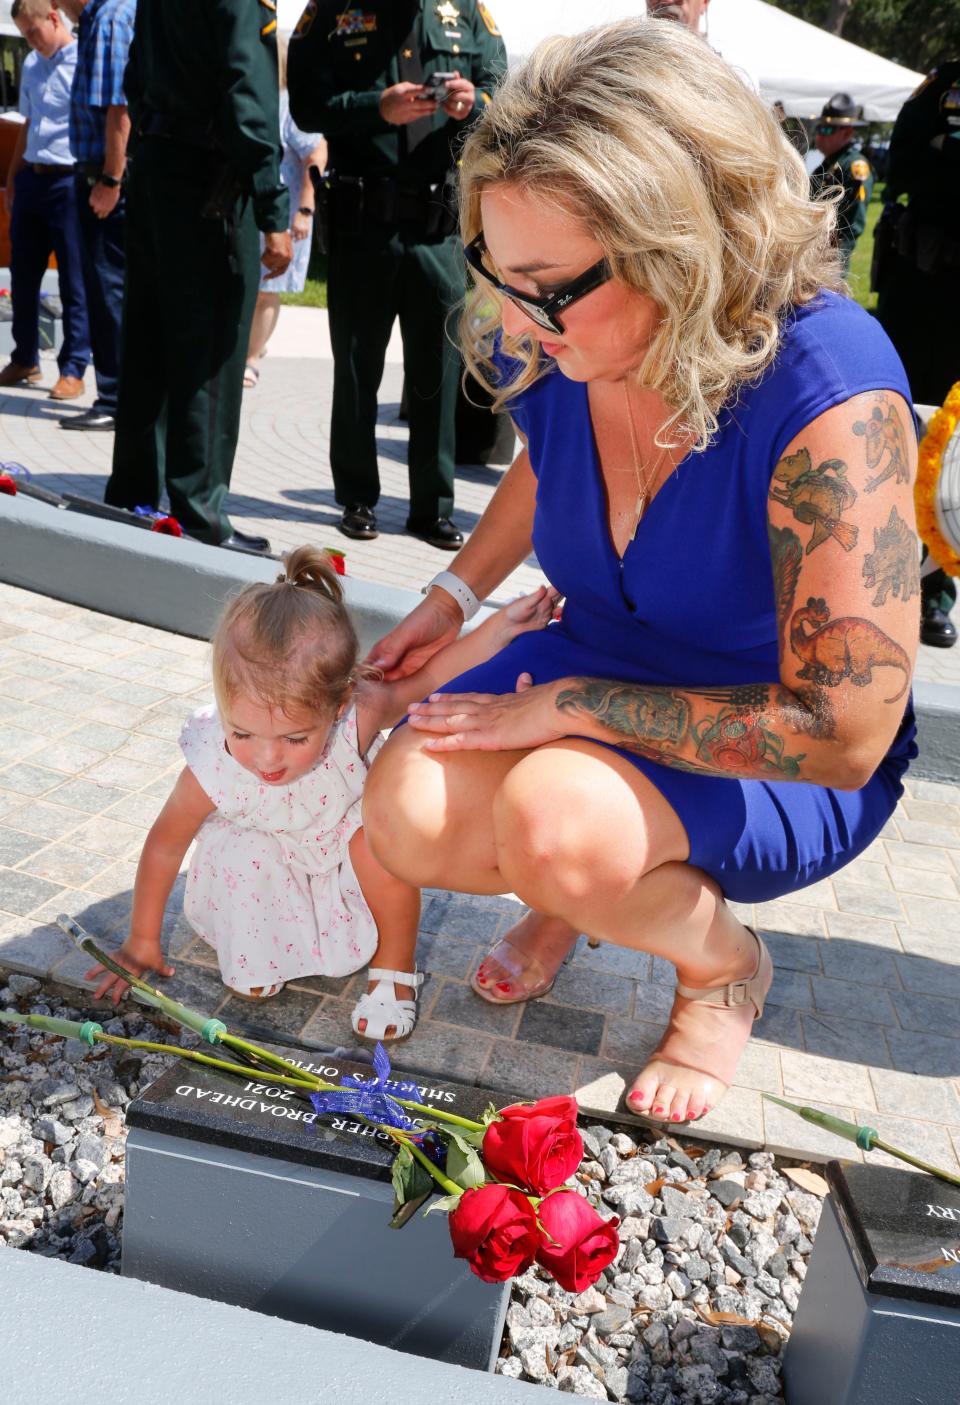 Elisa Broadhead looks on as her 1-year-old daughter, Reagan, adjusts the roses on the memorial plaque for her father, Polk County sheriff's Deputy Christopher Broadhead on Thursday. Broadhead died of COVID-19 in August after contracting the disease in the line of duty.